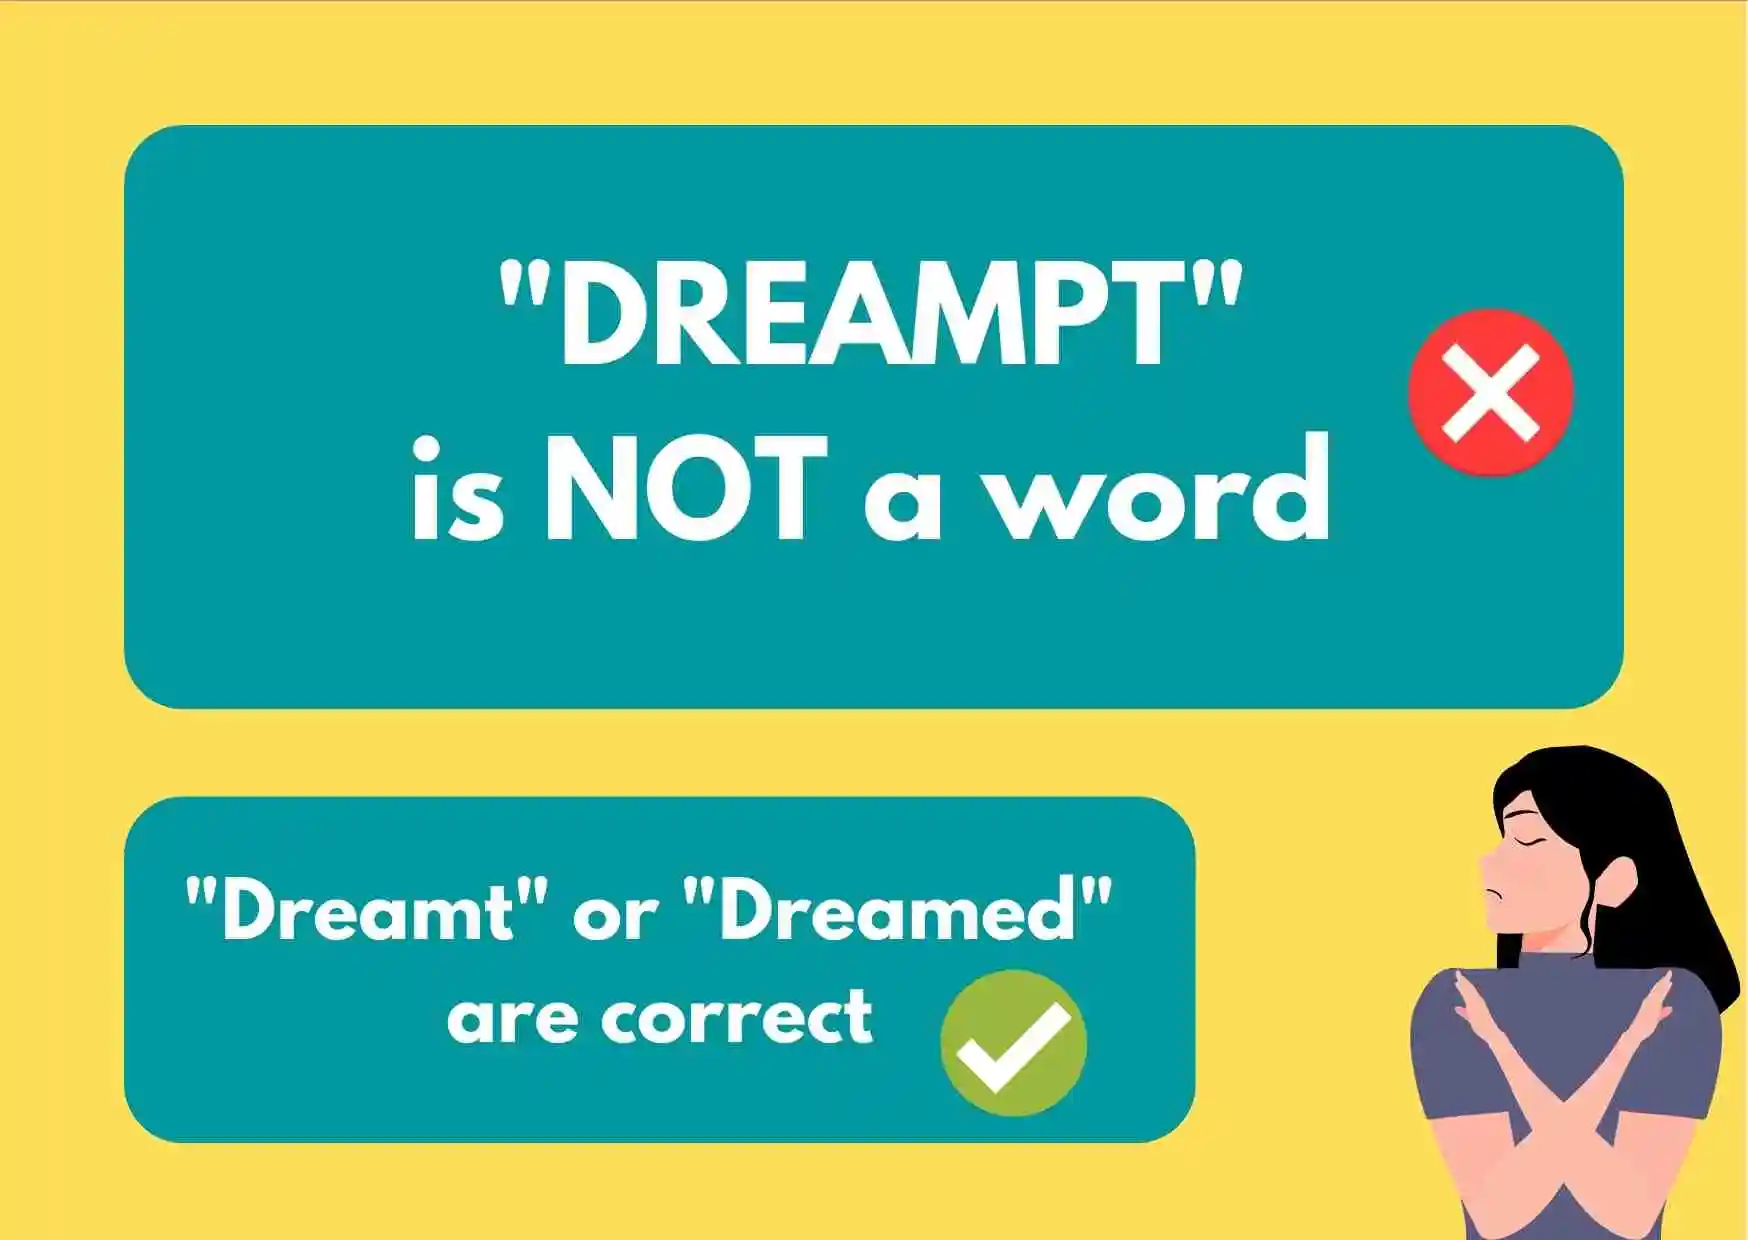 A graphic of a woman crossing her hands in refusal with the text: "Dreampt or dreampted is NOT a word. Dreamed or Dreamt is correct"